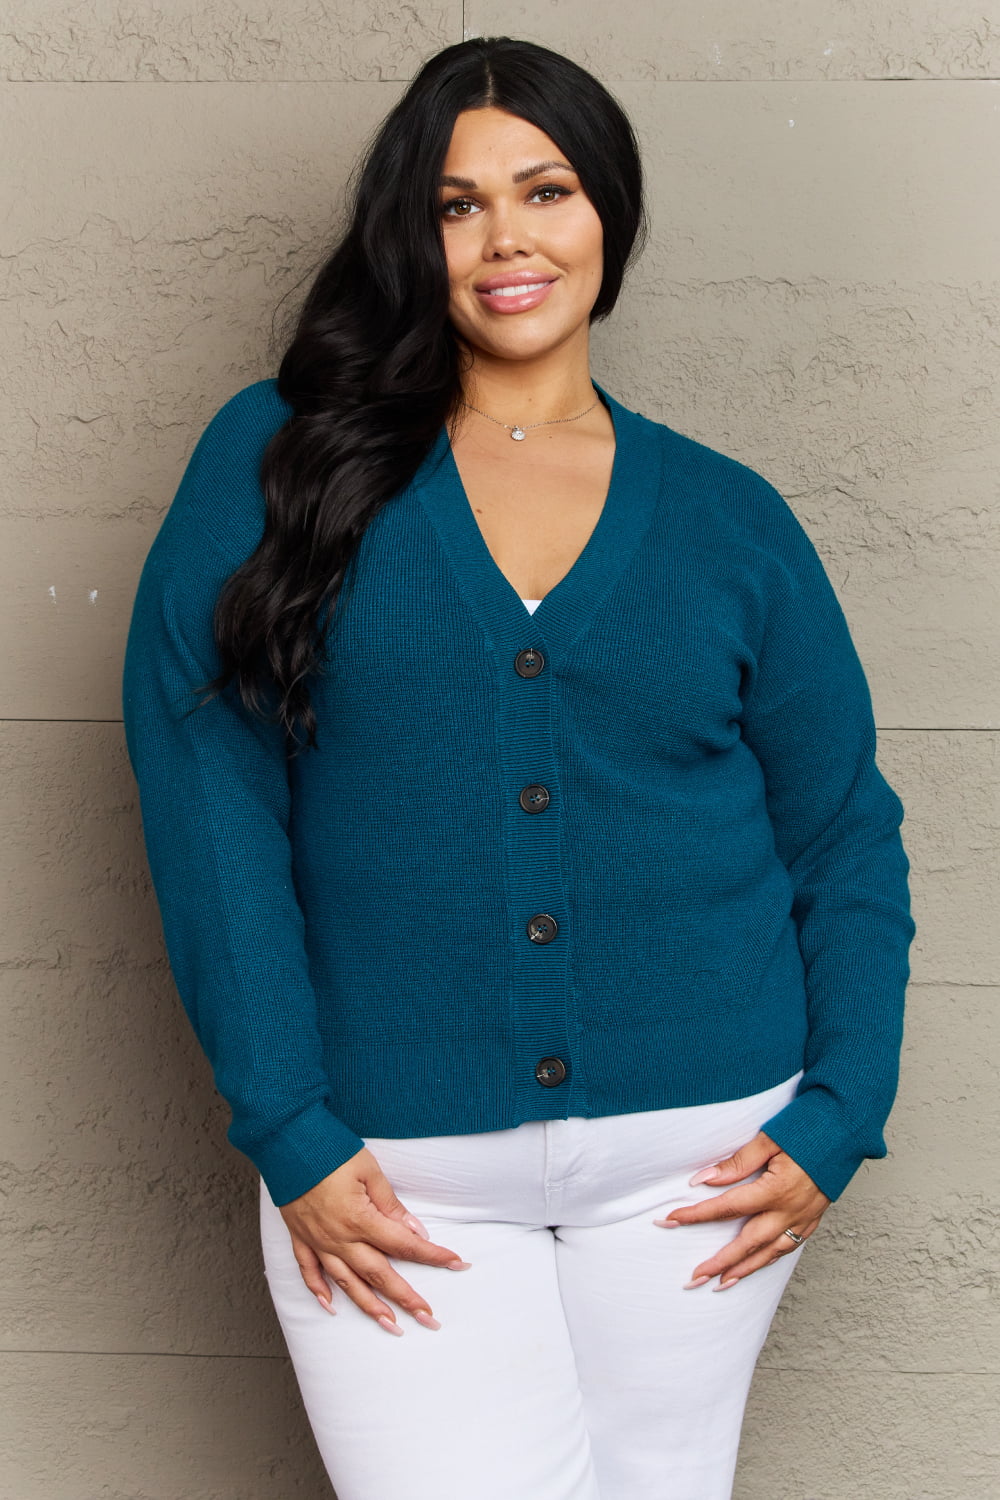 Kiss Me Tonight Full Size Button Down Cardigan in Teal - Women’s Clothing & Accessories - Shirts & Tops - 7 - 2024